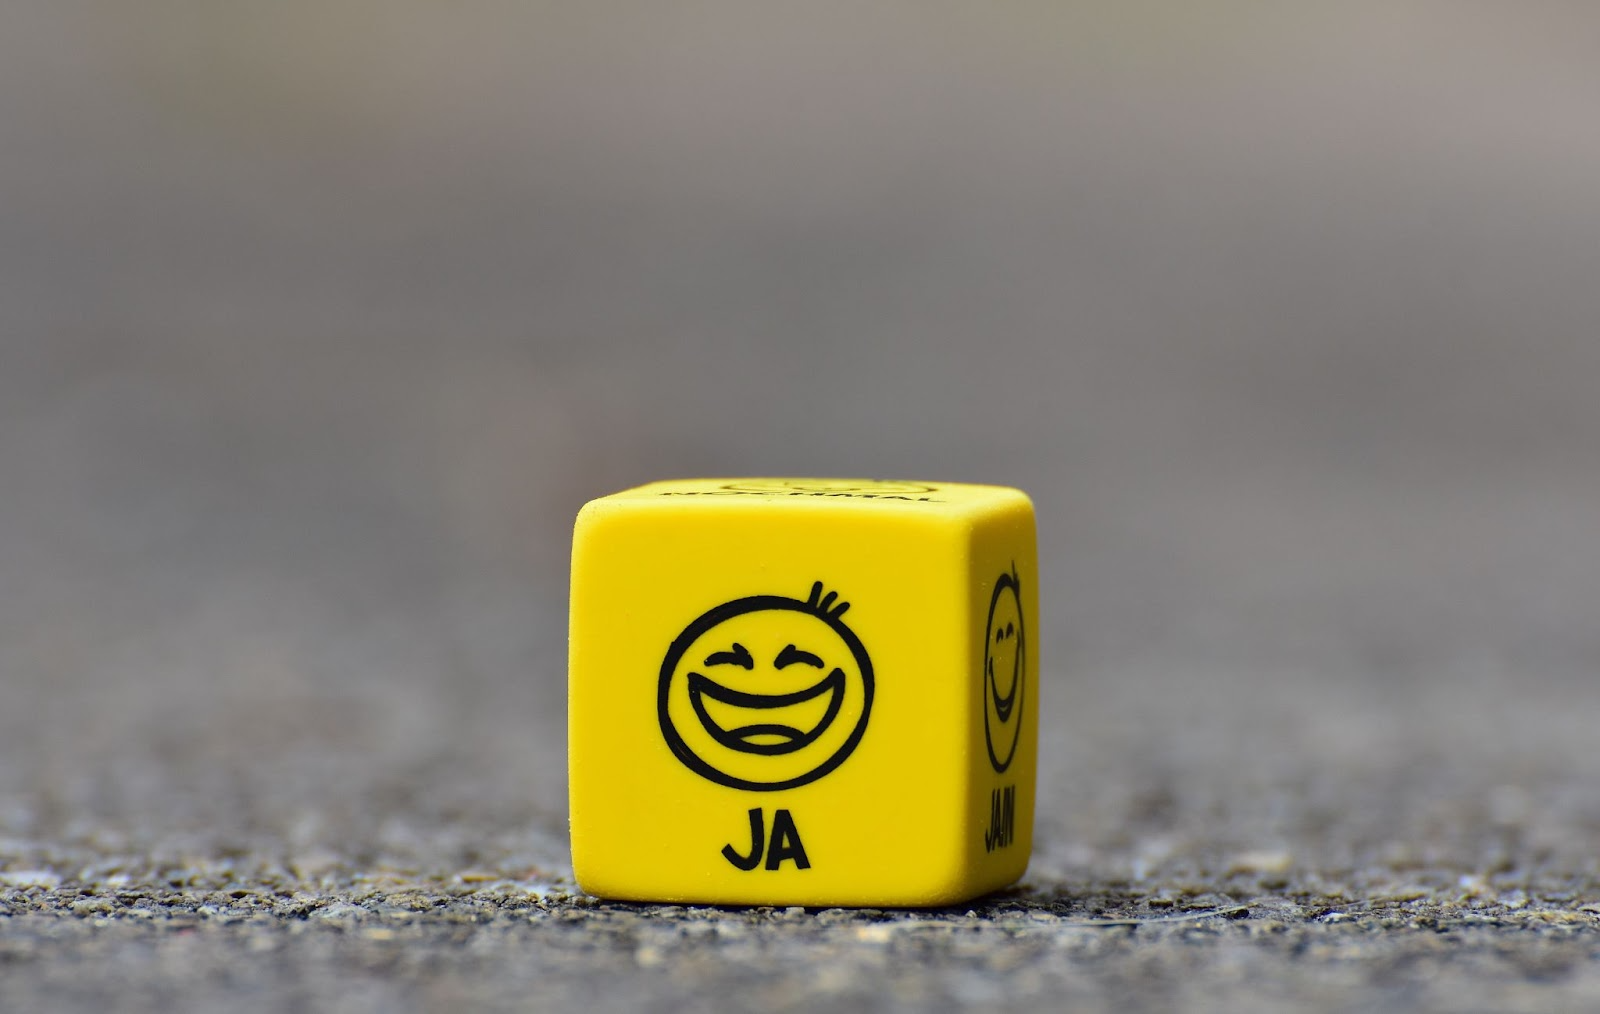 Source: https://www.pexels.com/photo/yellow-cube-on-brown-pavement-208147/